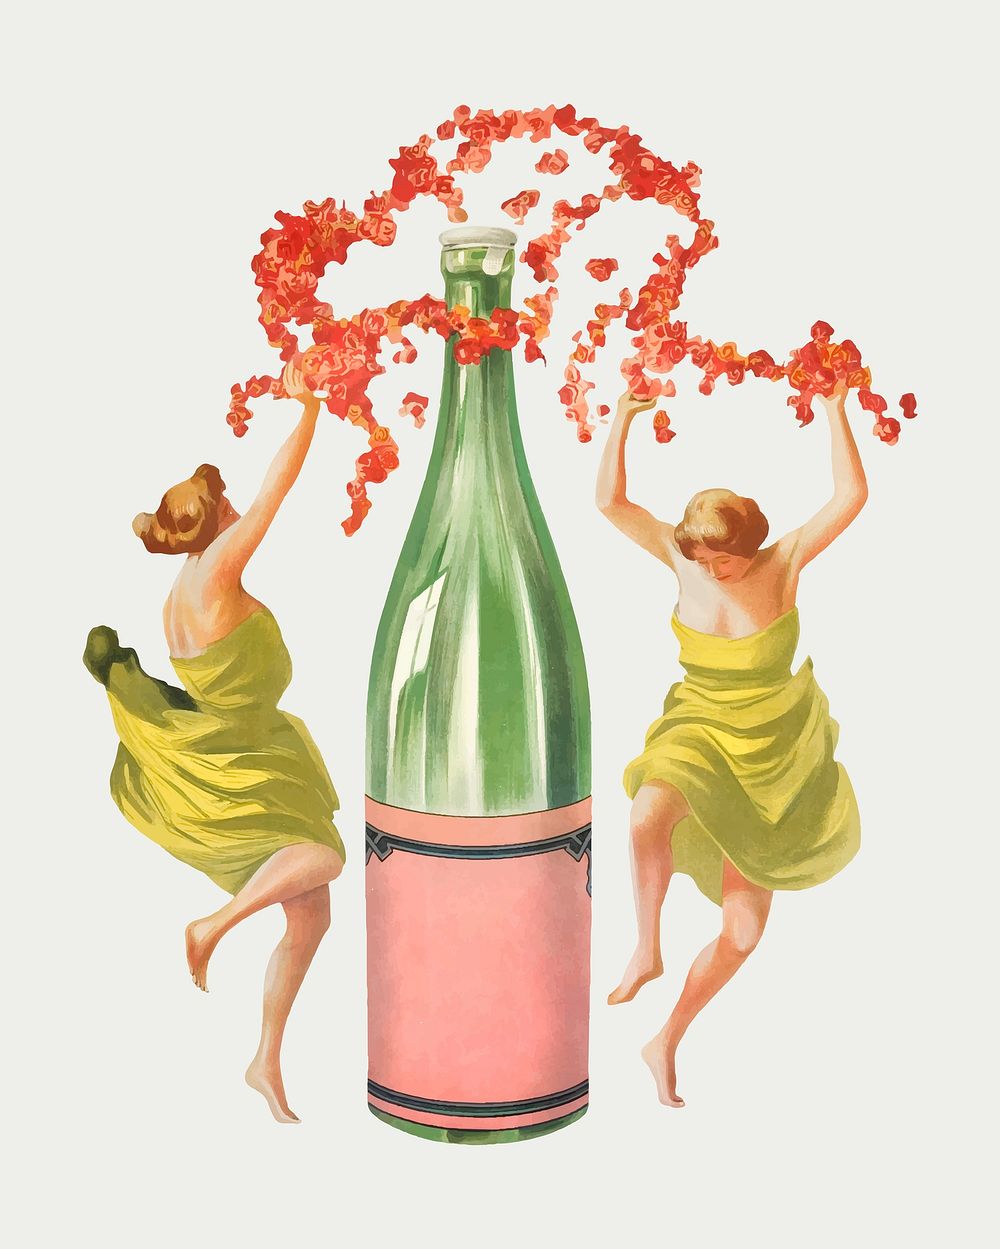 Mineral water bottle vector with women illustration, remixed from artworks by Leonetto Cappiello